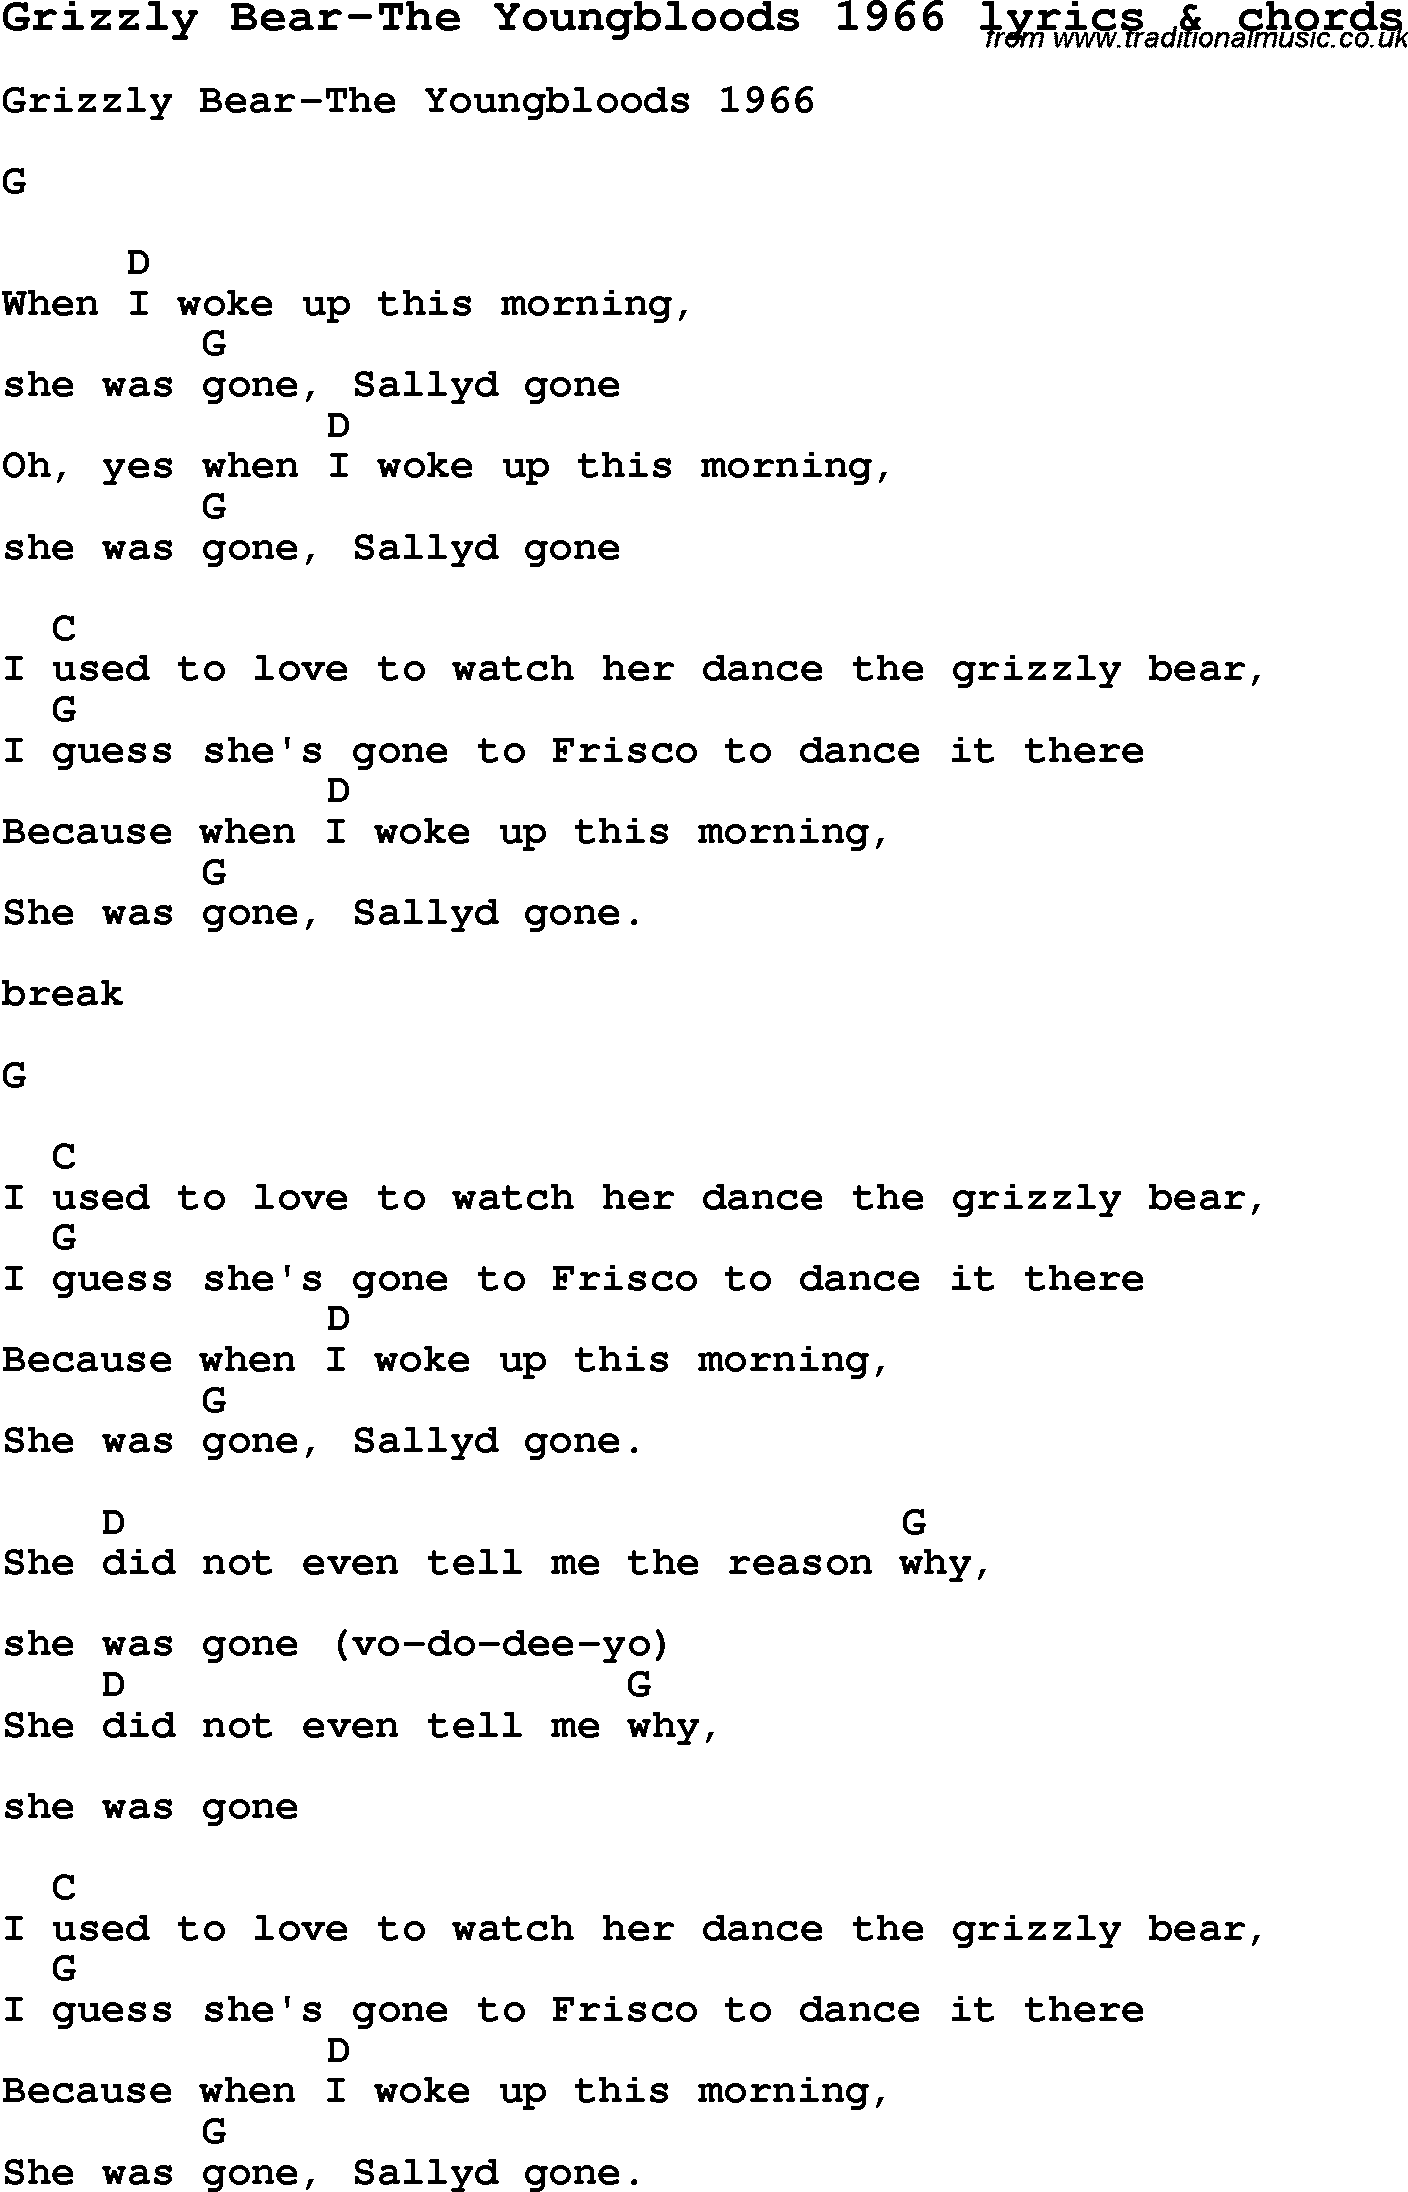 Love Song Lyrics for: Grizzly Bear-The Youngbloods 1966 with chords for Ukulele, Guitar Banjo etc.